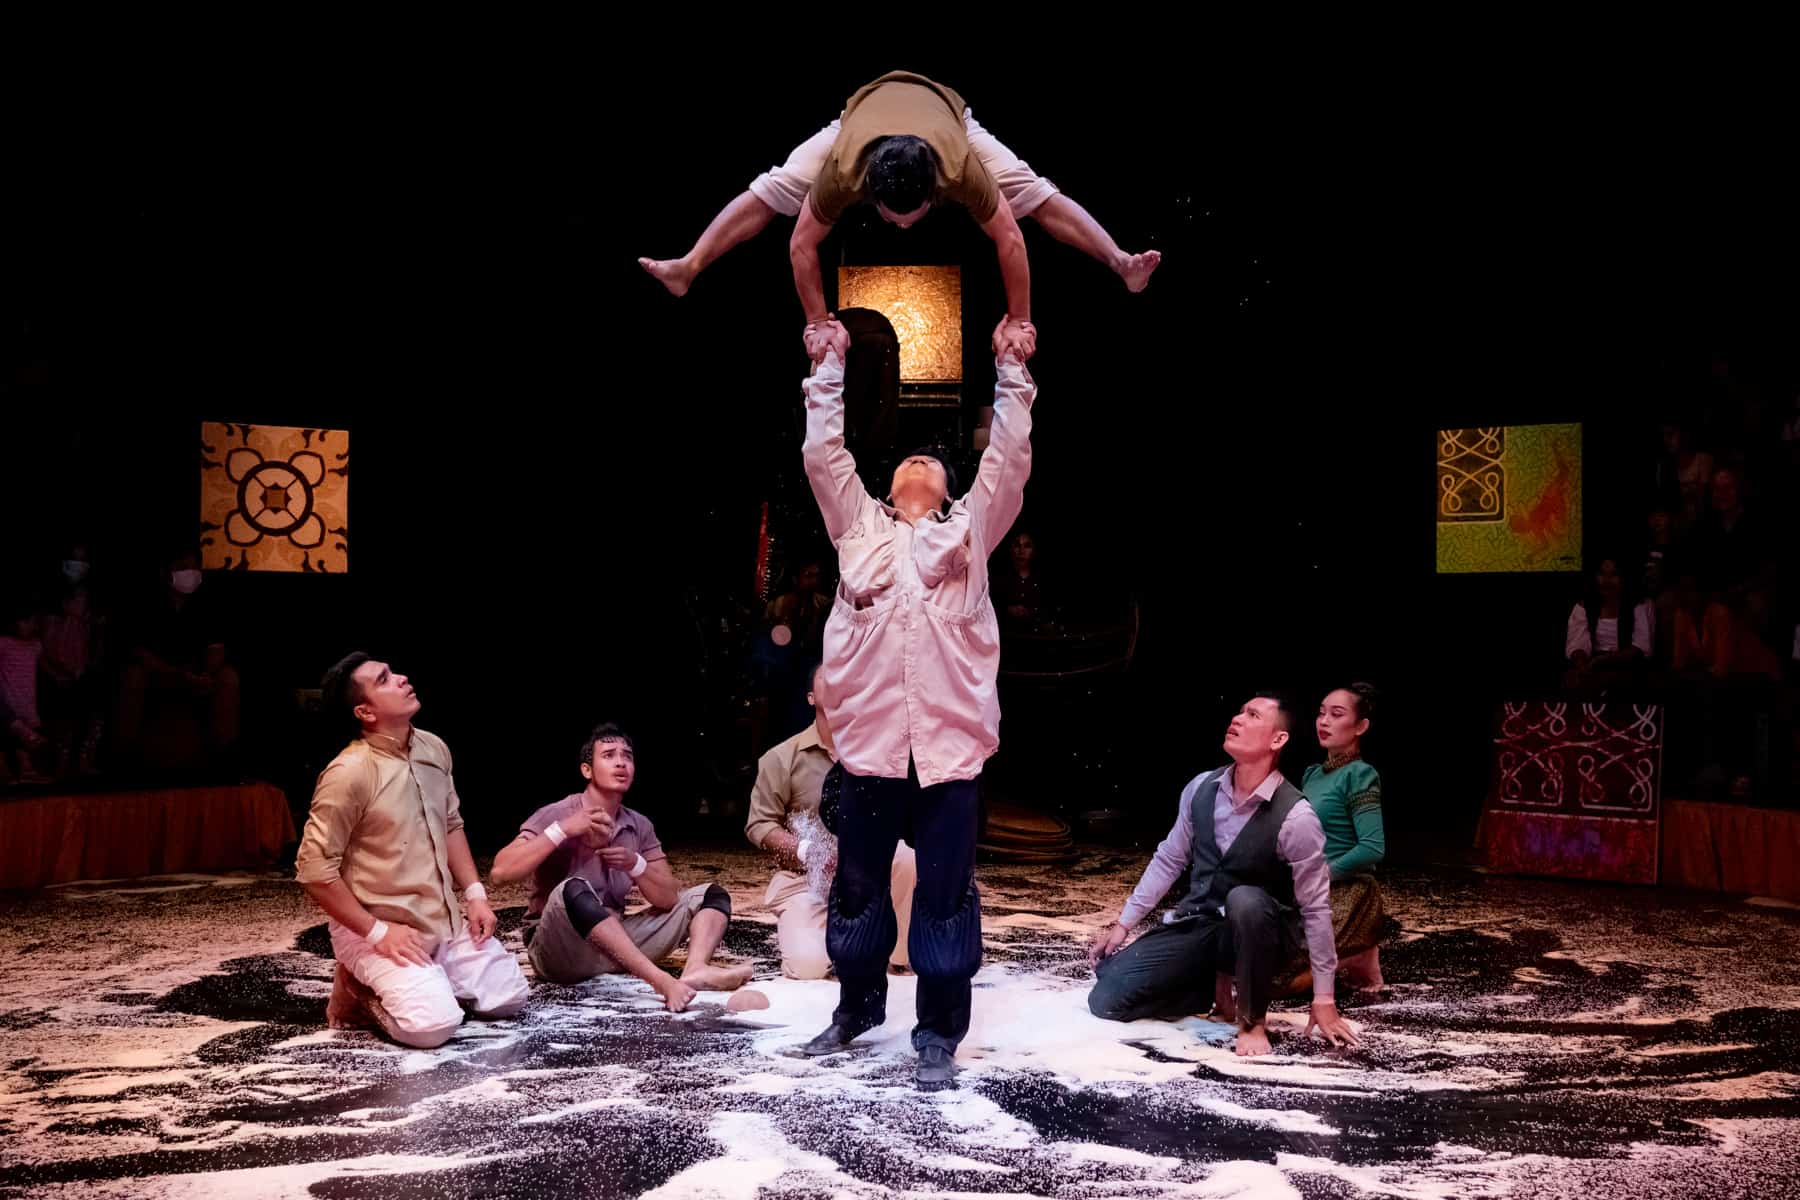 Five performers sit on the ground covered in rice grains looking up at a man balancing another high above his head. The background is dark with golden lighting.